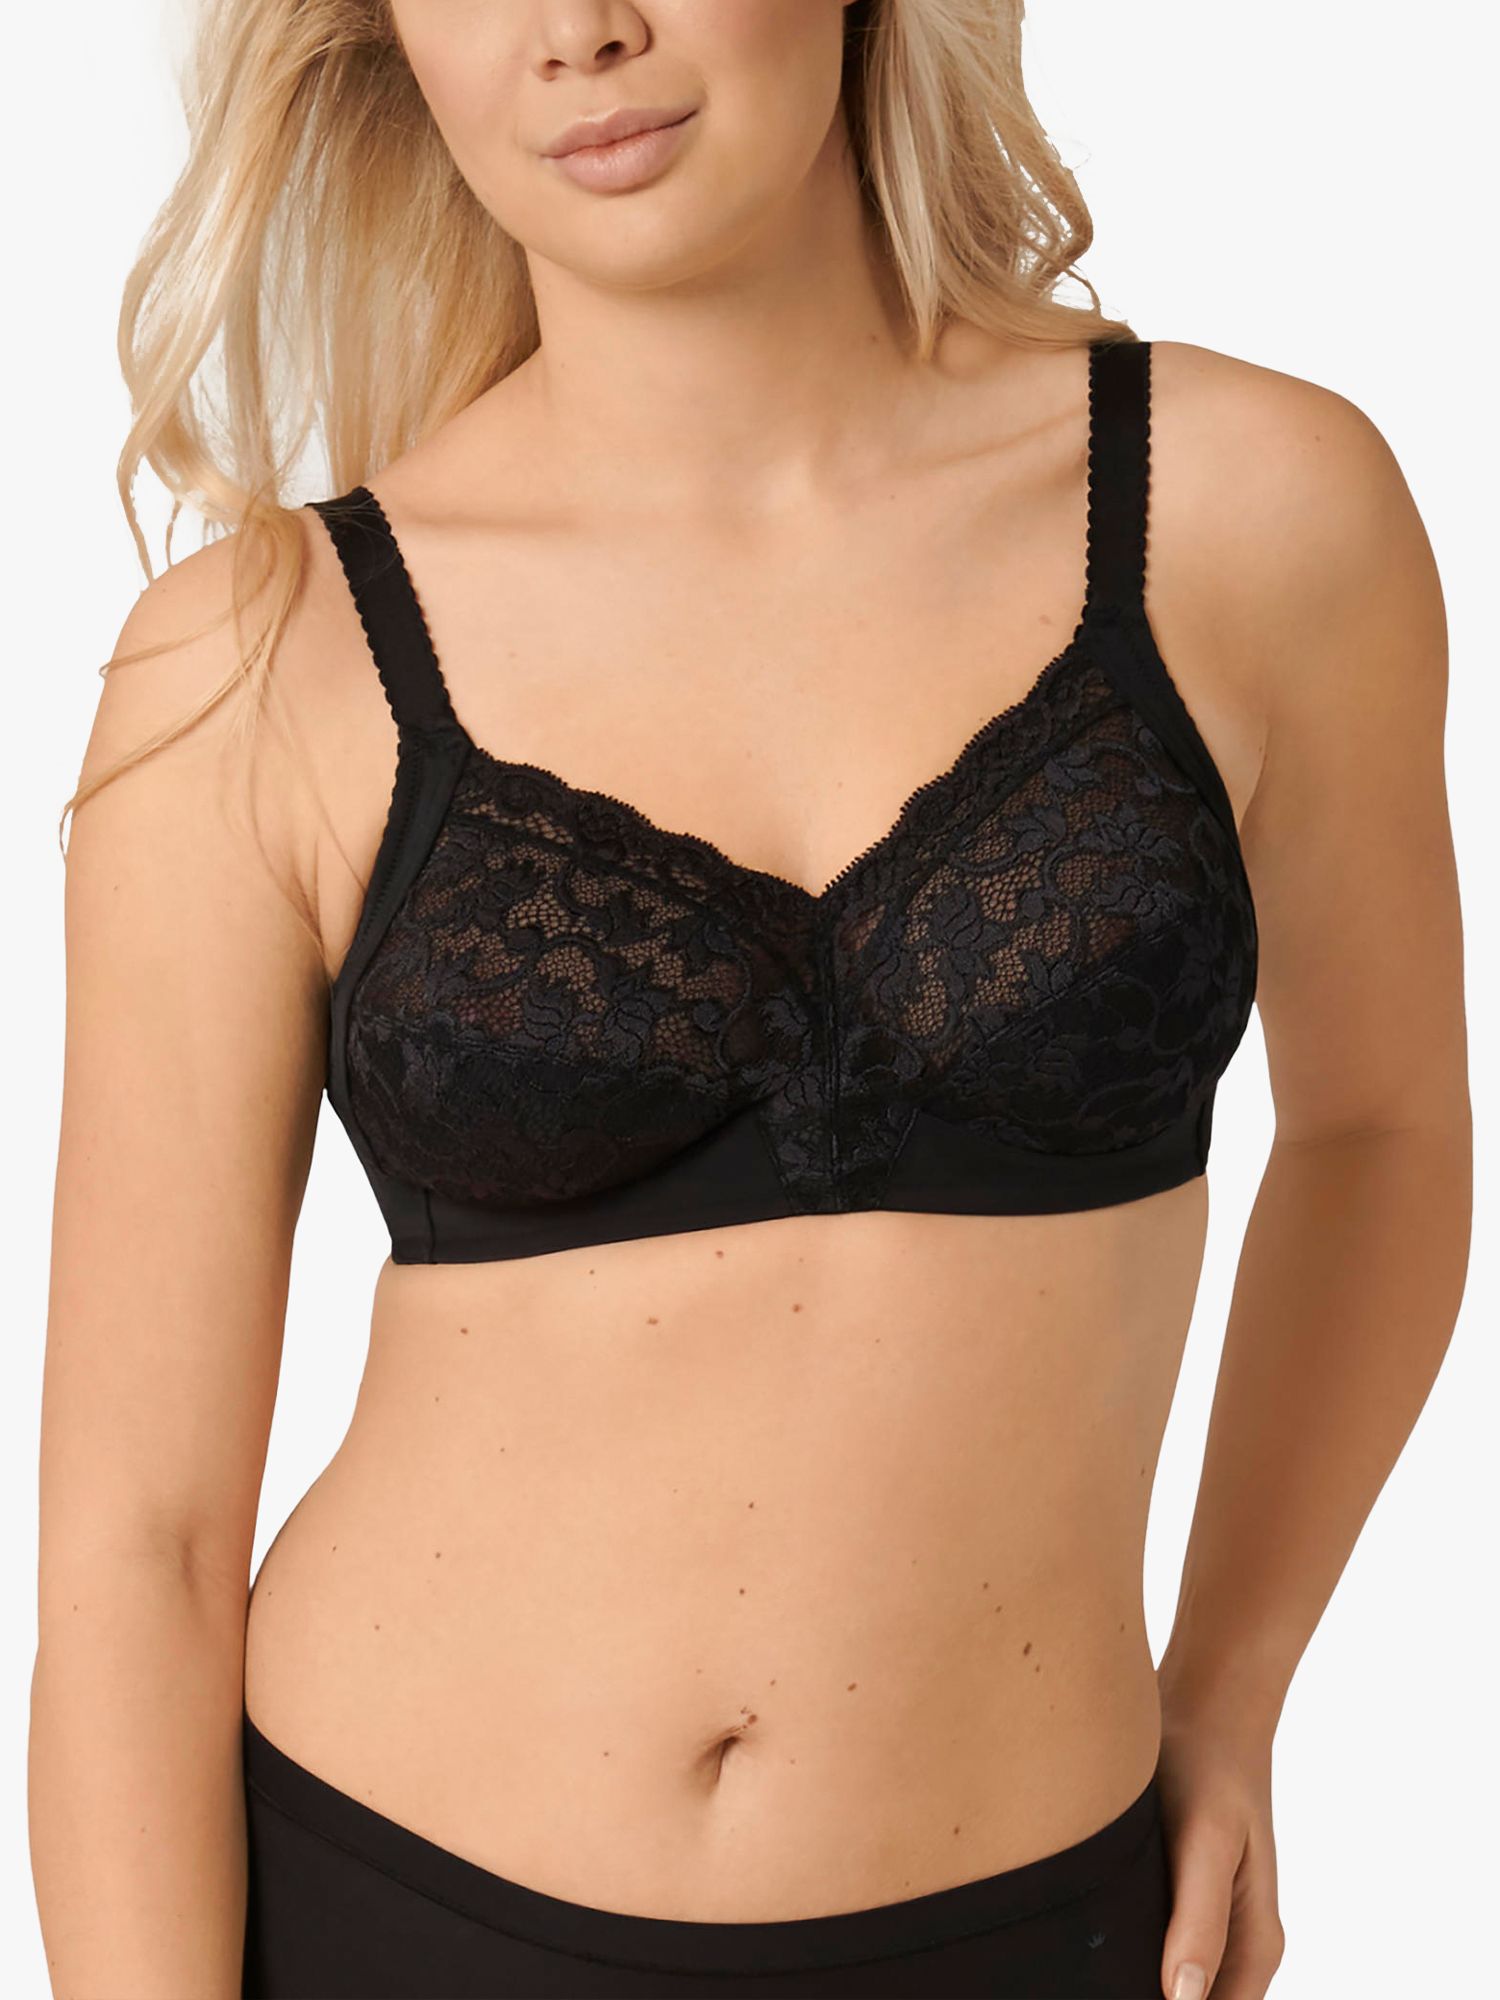 Delight padded bra pack of [1 pc] with full coveragr and normal bust size padded  bras